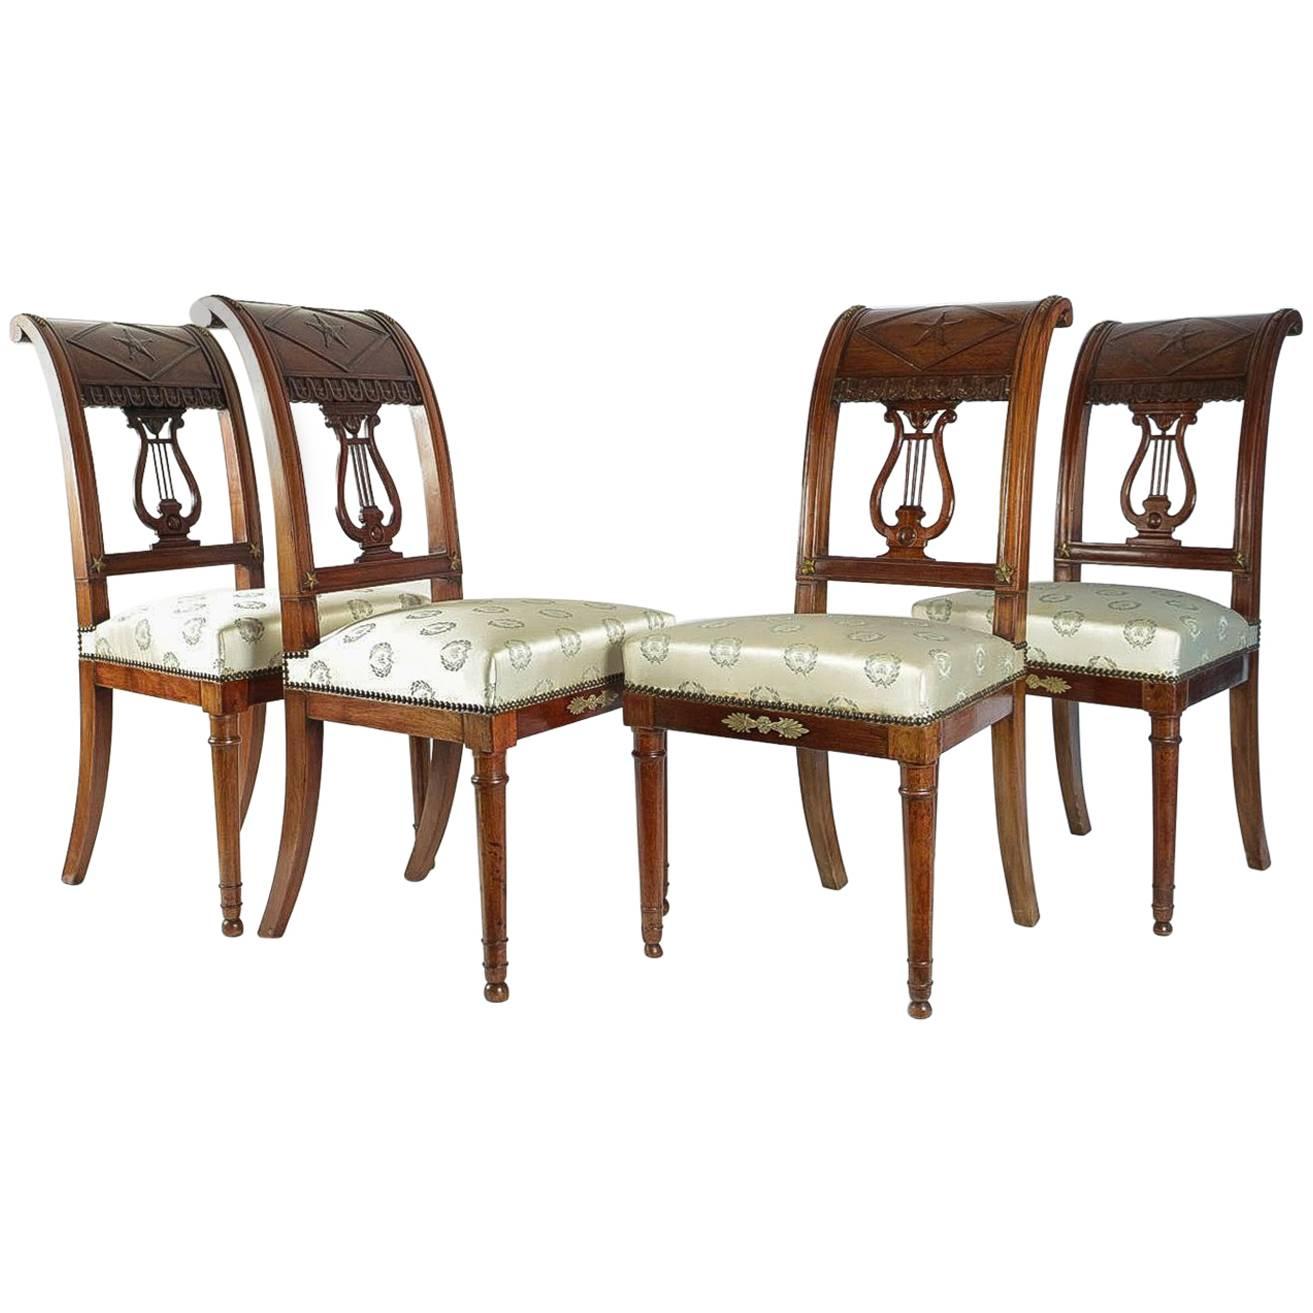 French Consulat Period Set of Four Mahogany Chairs by Jacob Desmalter